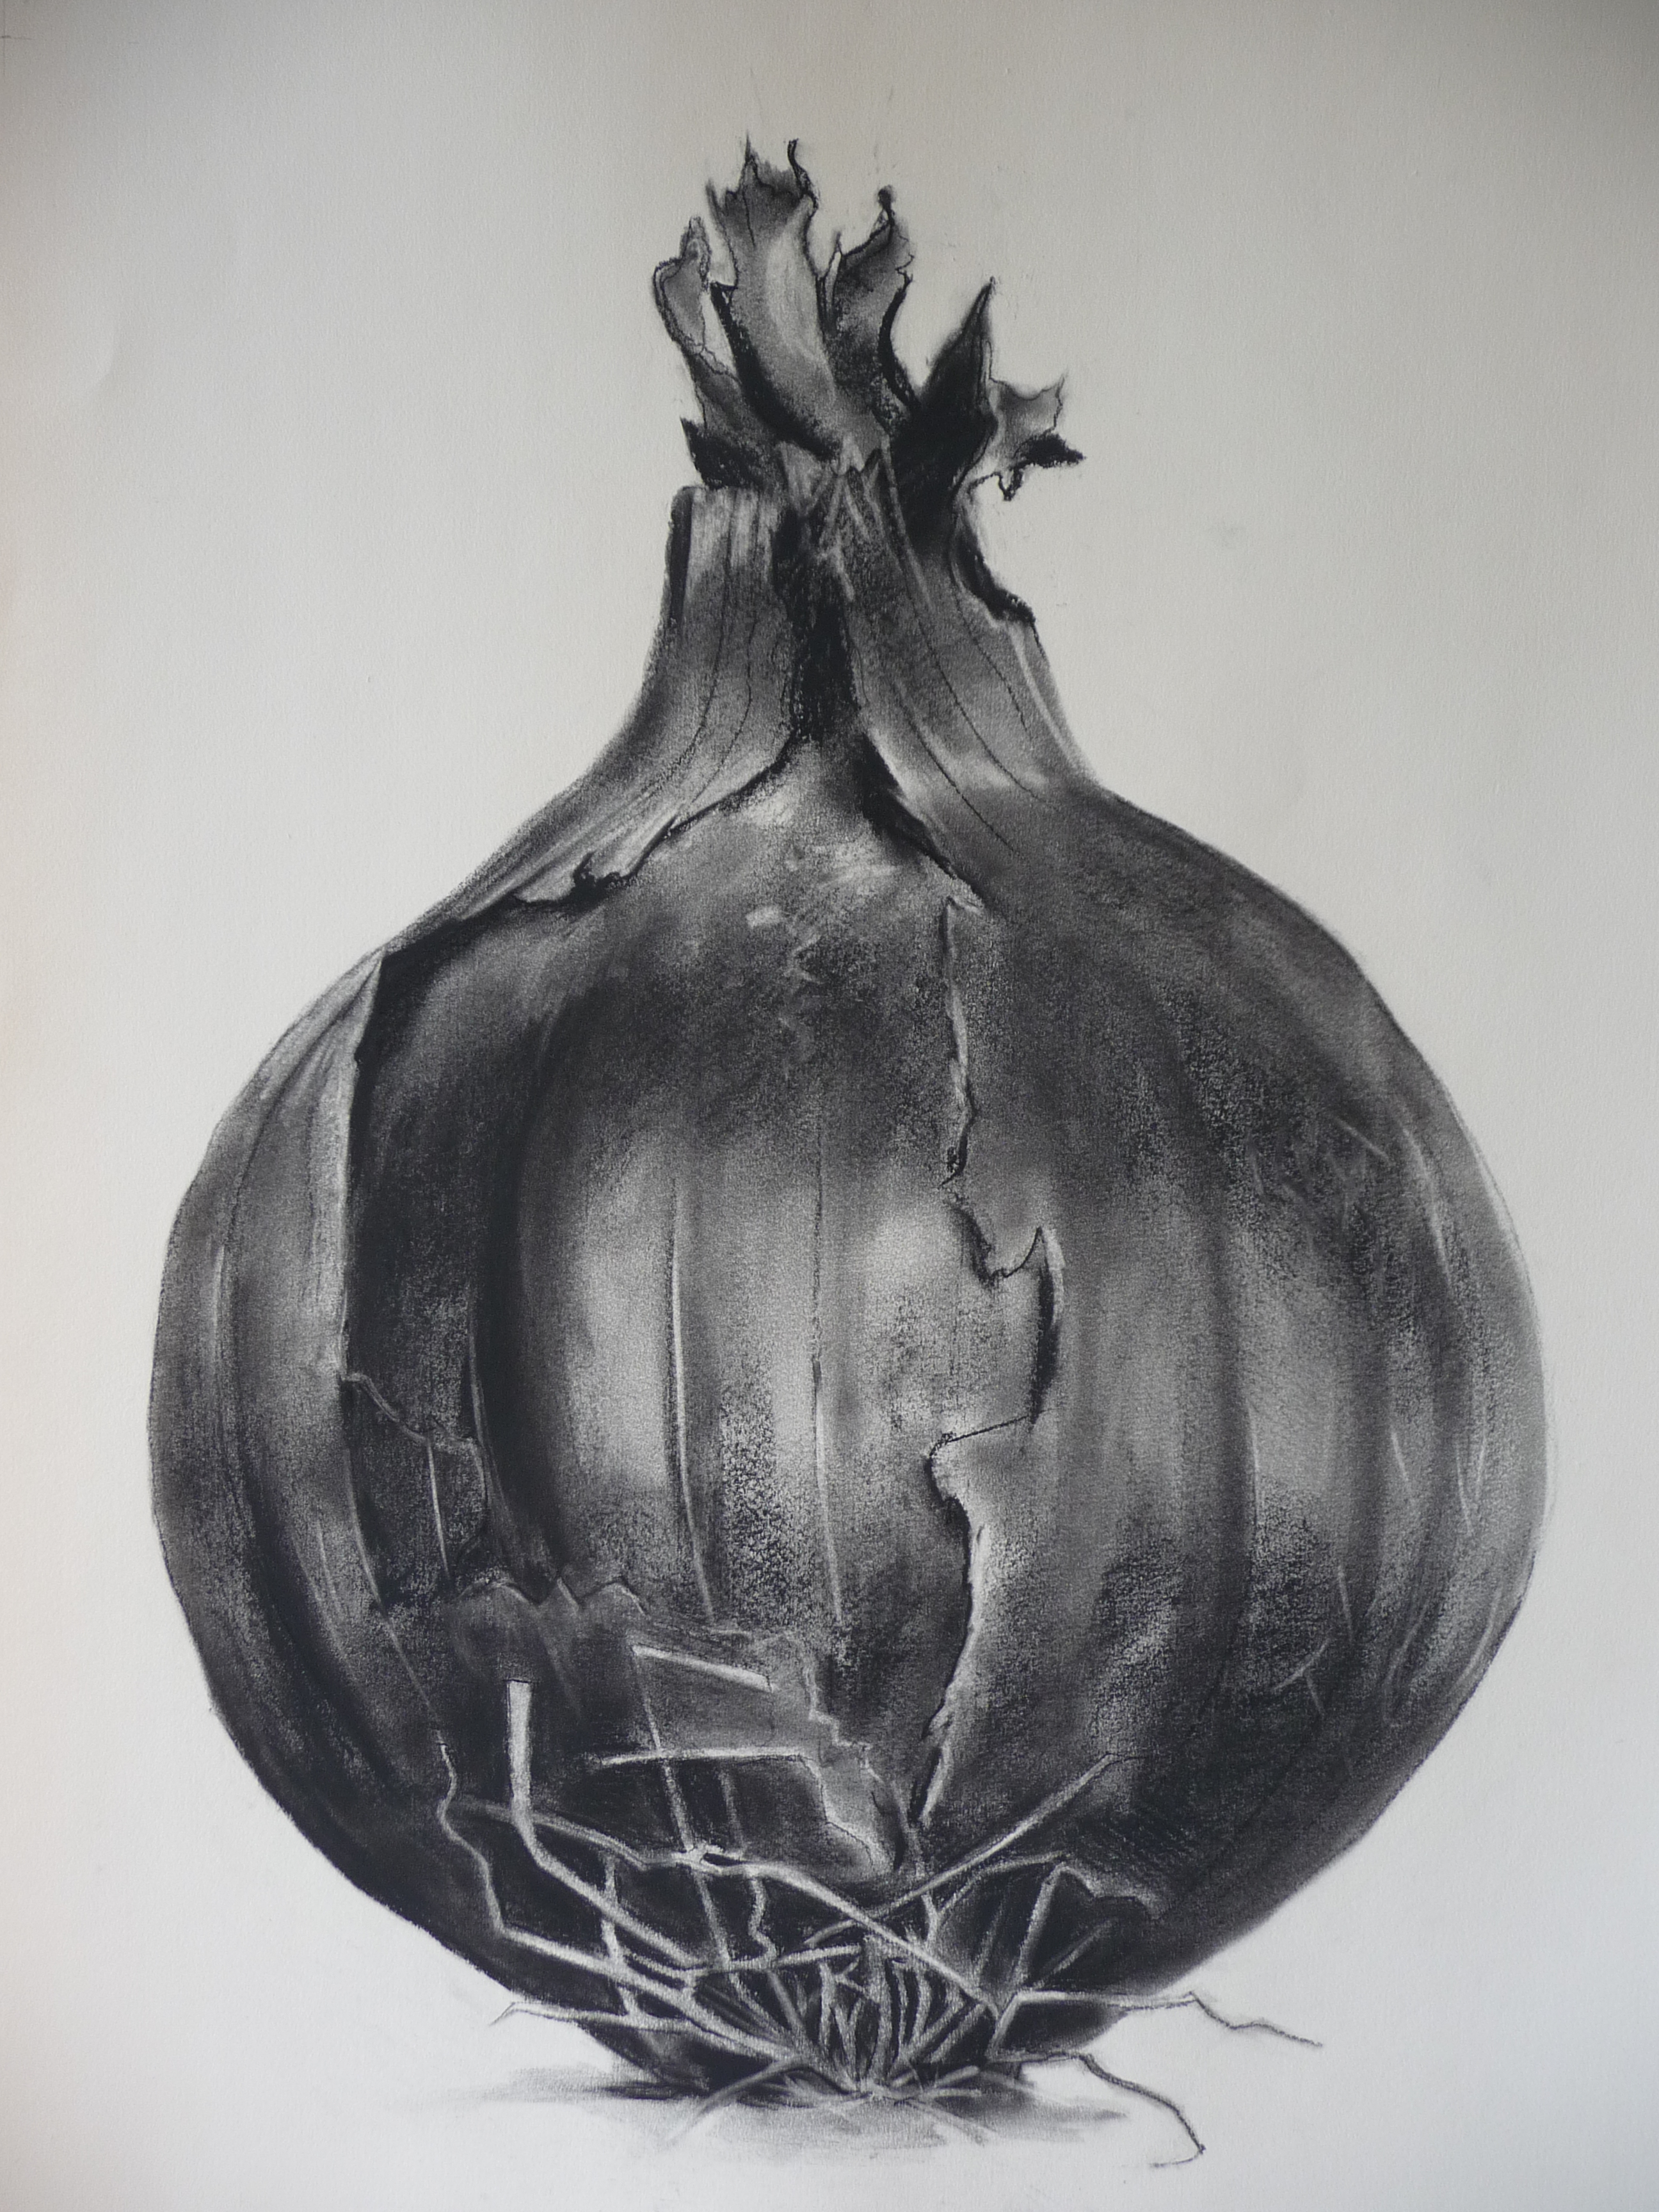 Charcoal drawing of a red onion